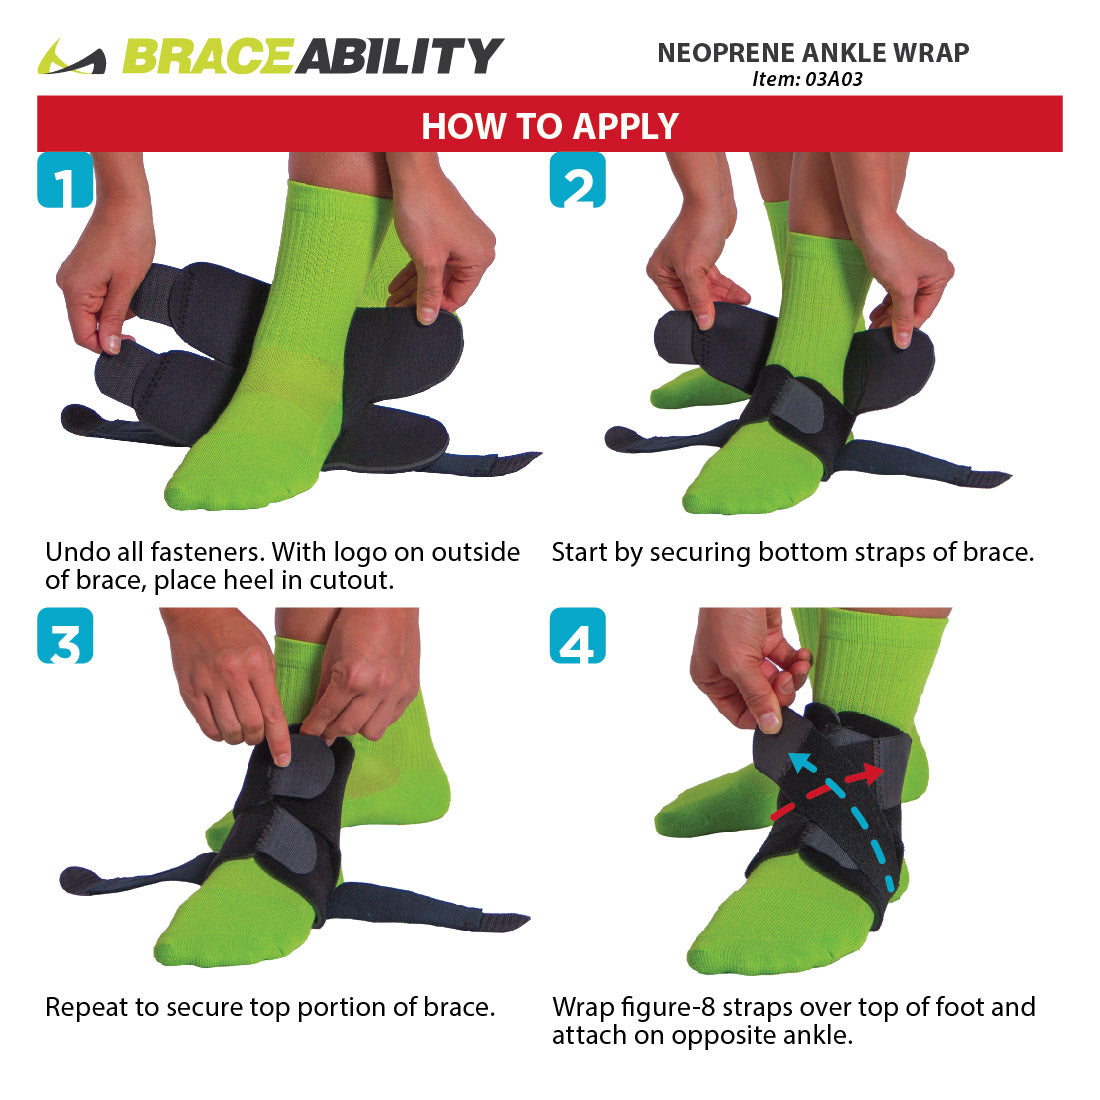 instruction sheet for waterproof ankle brace wrapping the foot strap, then the ankle strap. The fasten the right figure 8 strap by wrapping it under your heel. Finish by wrapping the figure 8 strap on the right size.